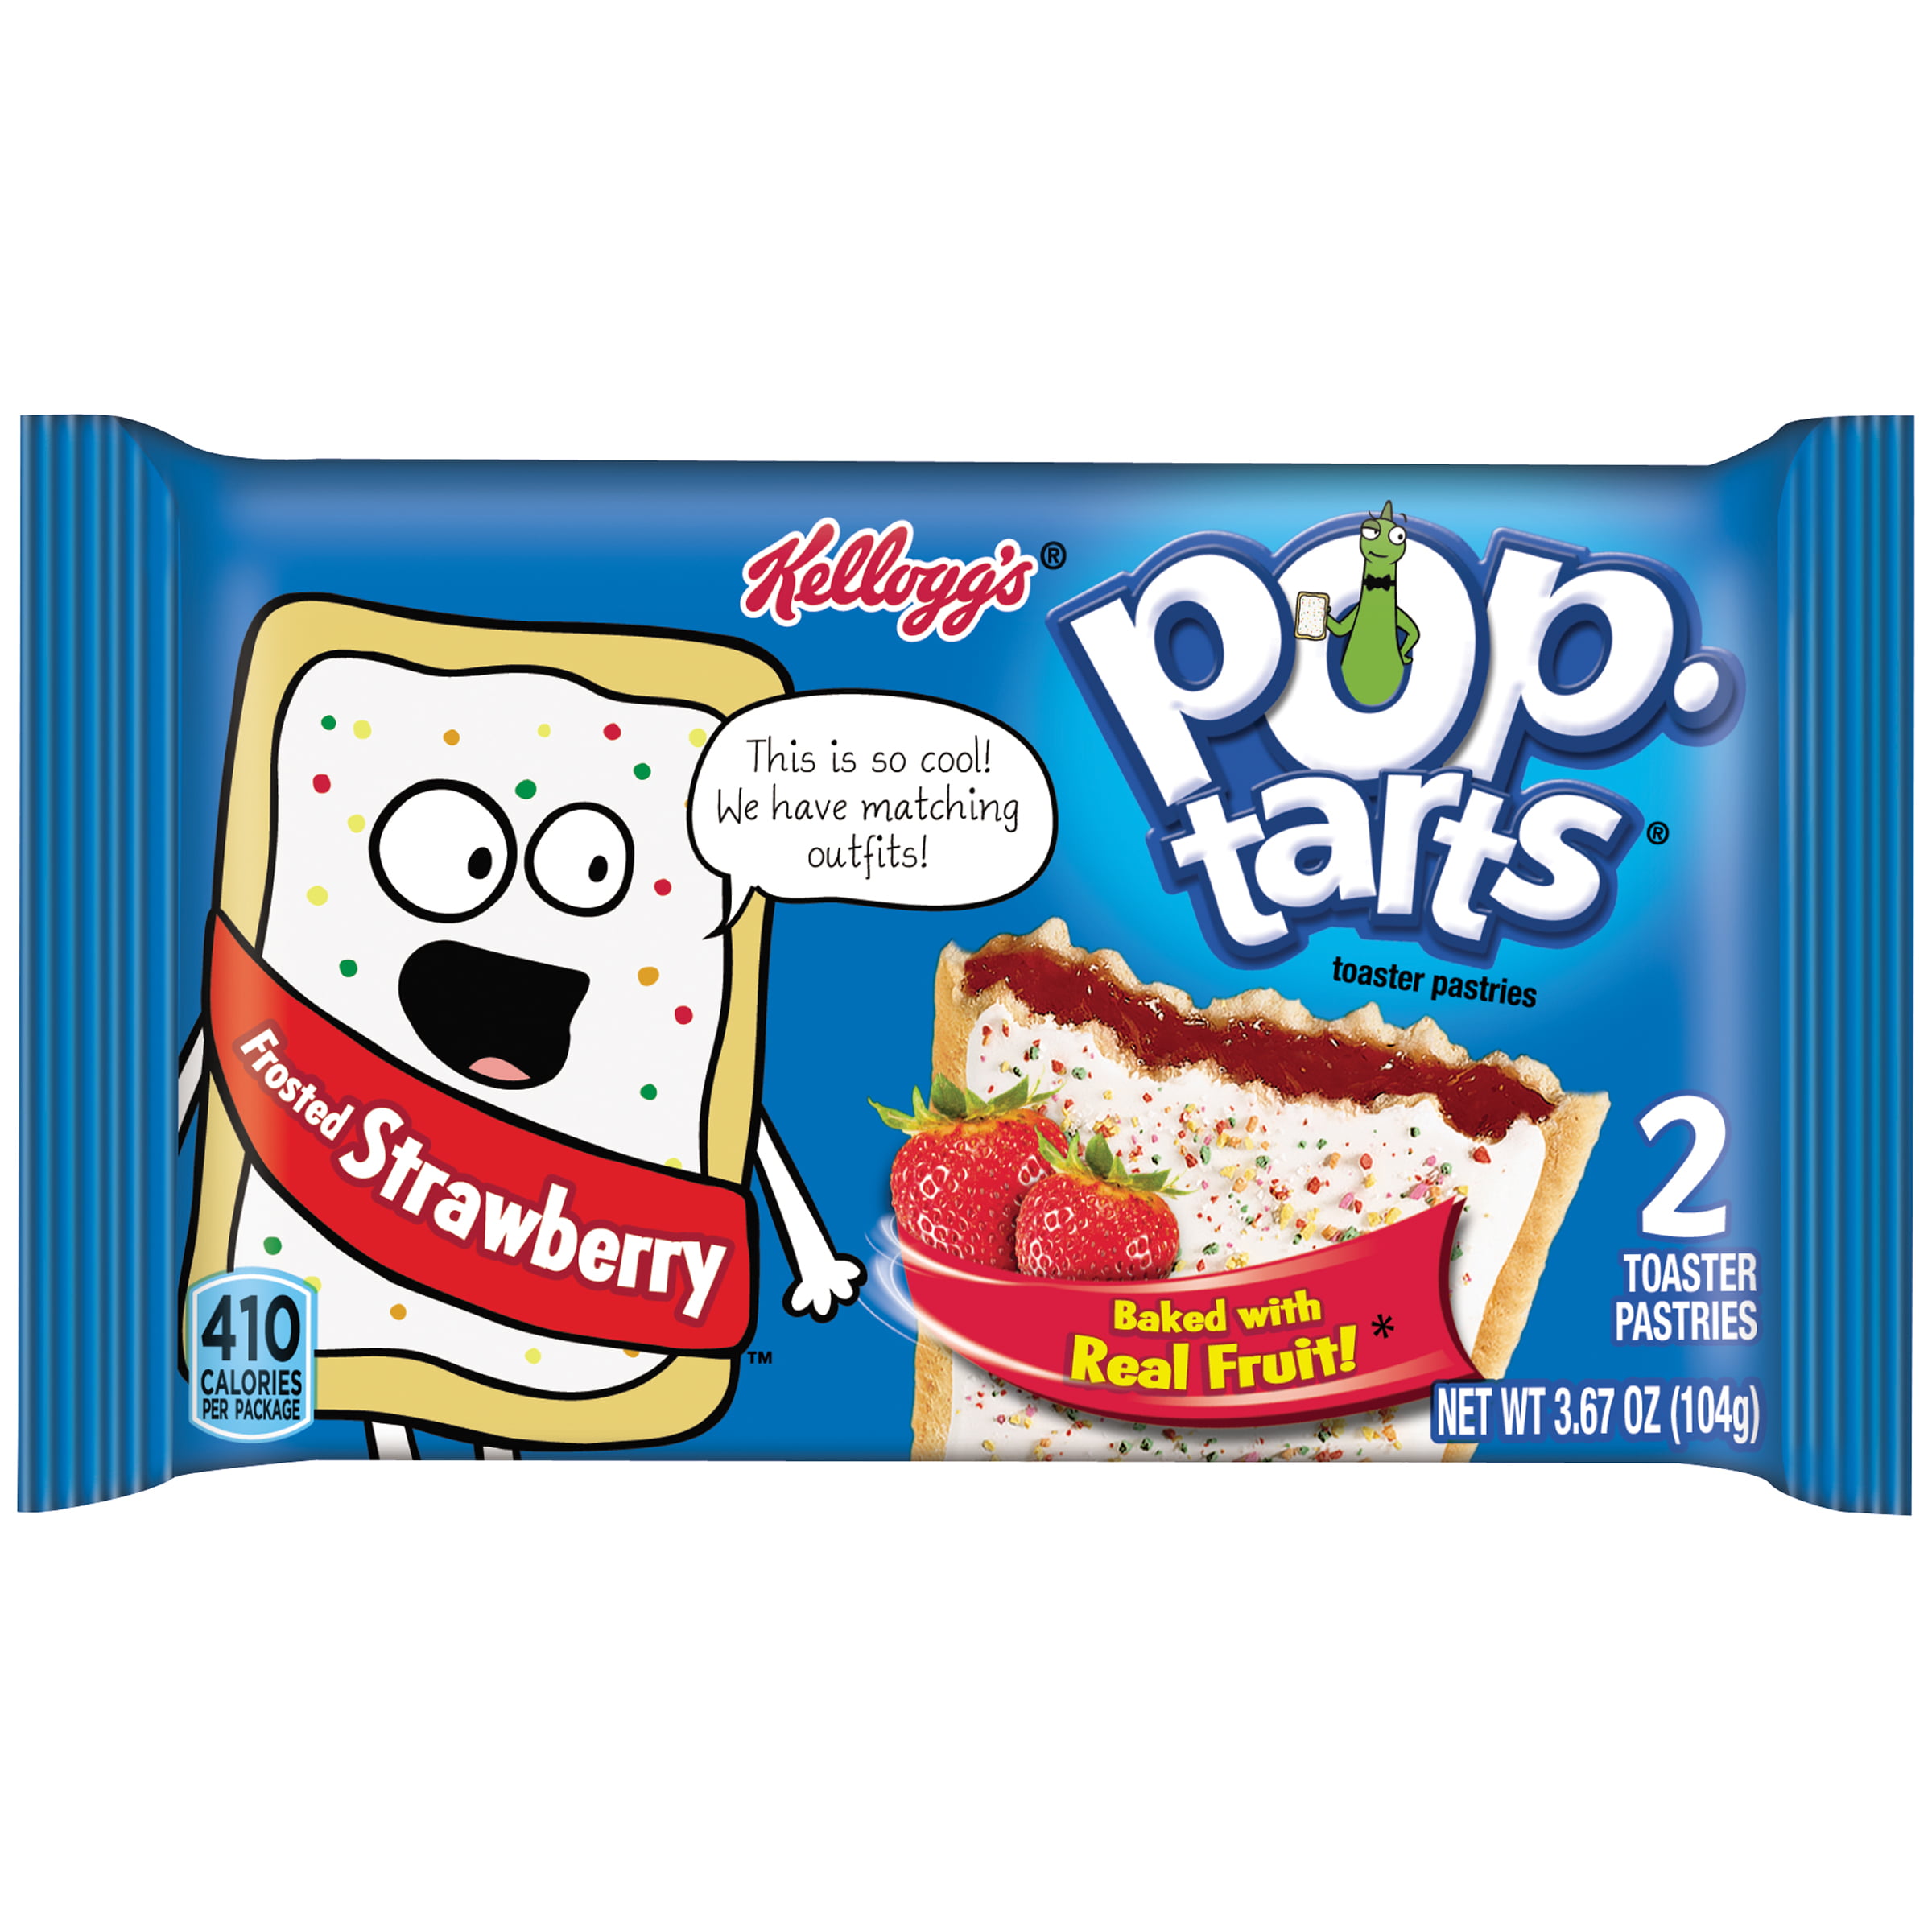 Pop-Tarts Frosted Strawberry Toaster Pastries, 2 count, 3.3 oz - Walmart.com